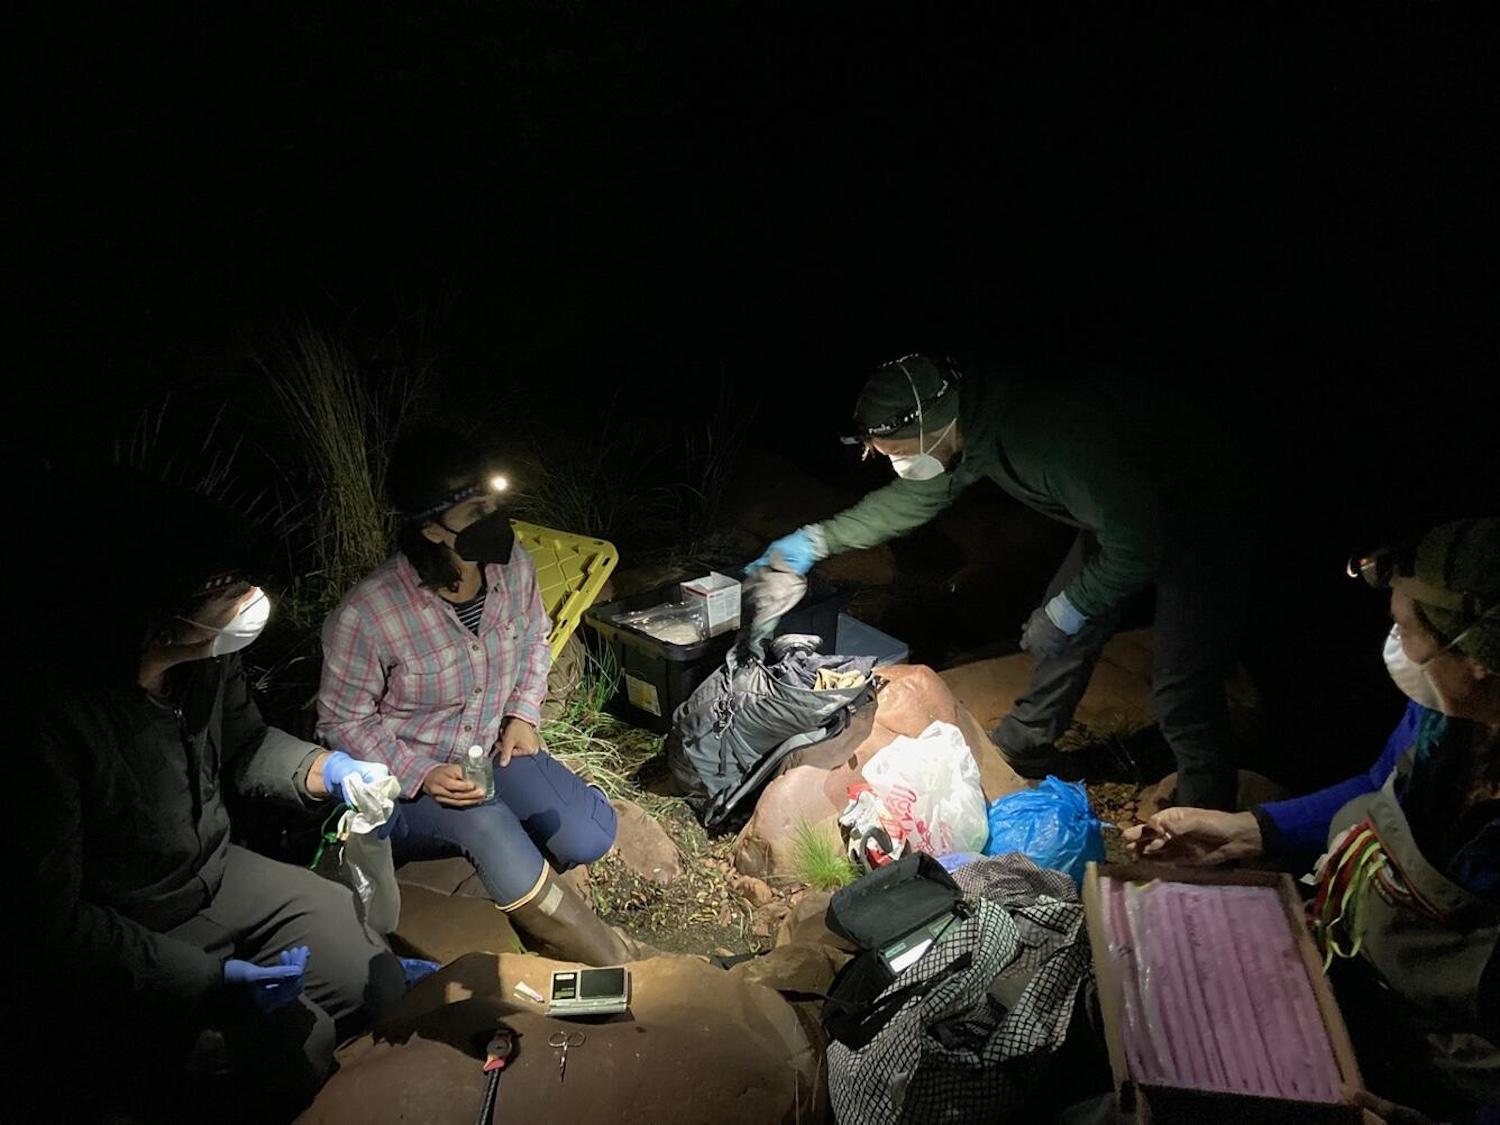 A team of biologists prepares to measure, weigh, and tag a captured bat.